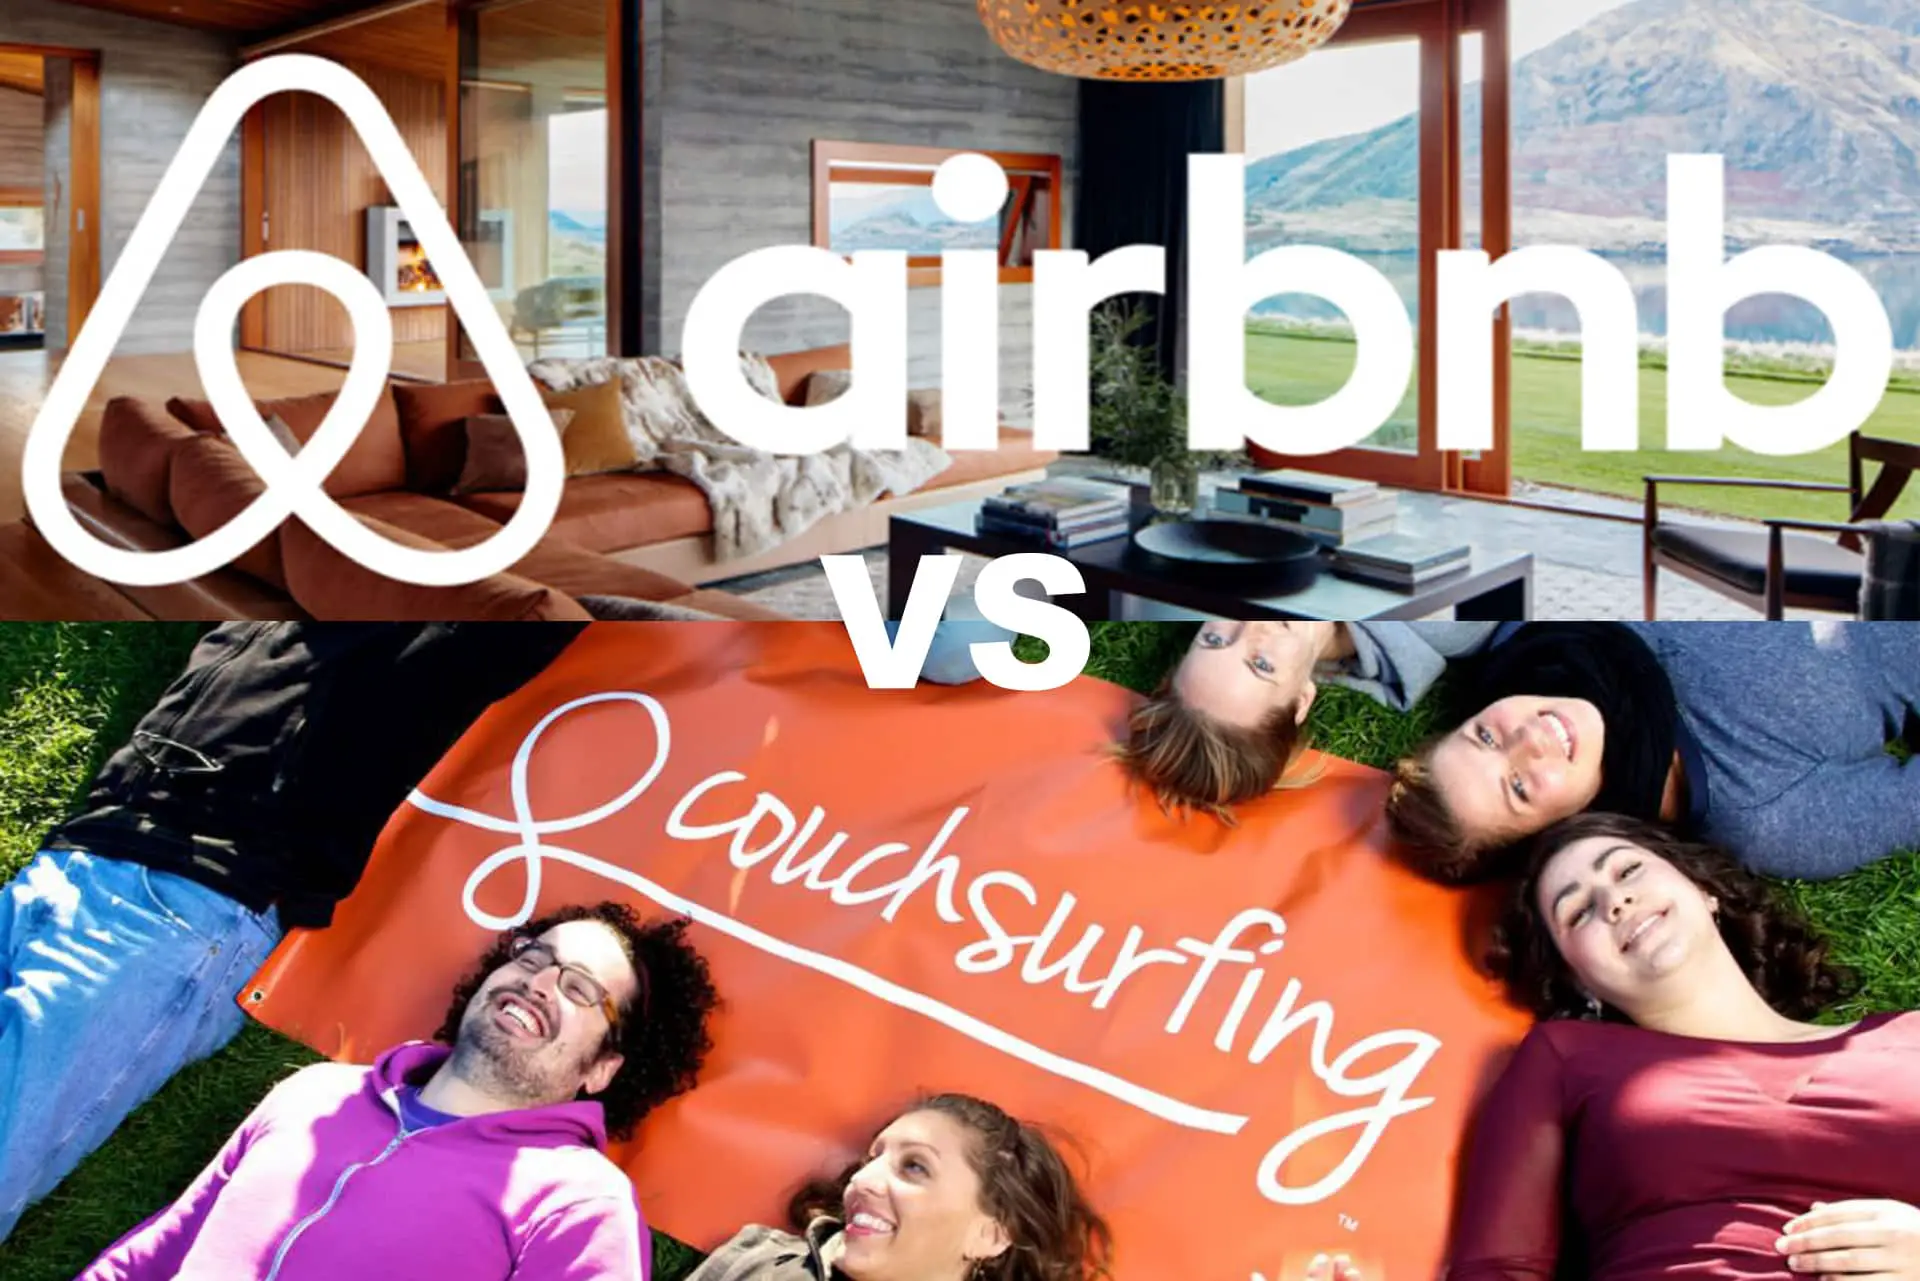 Couchsurfing vs. Airbnb: Which should I use and why?